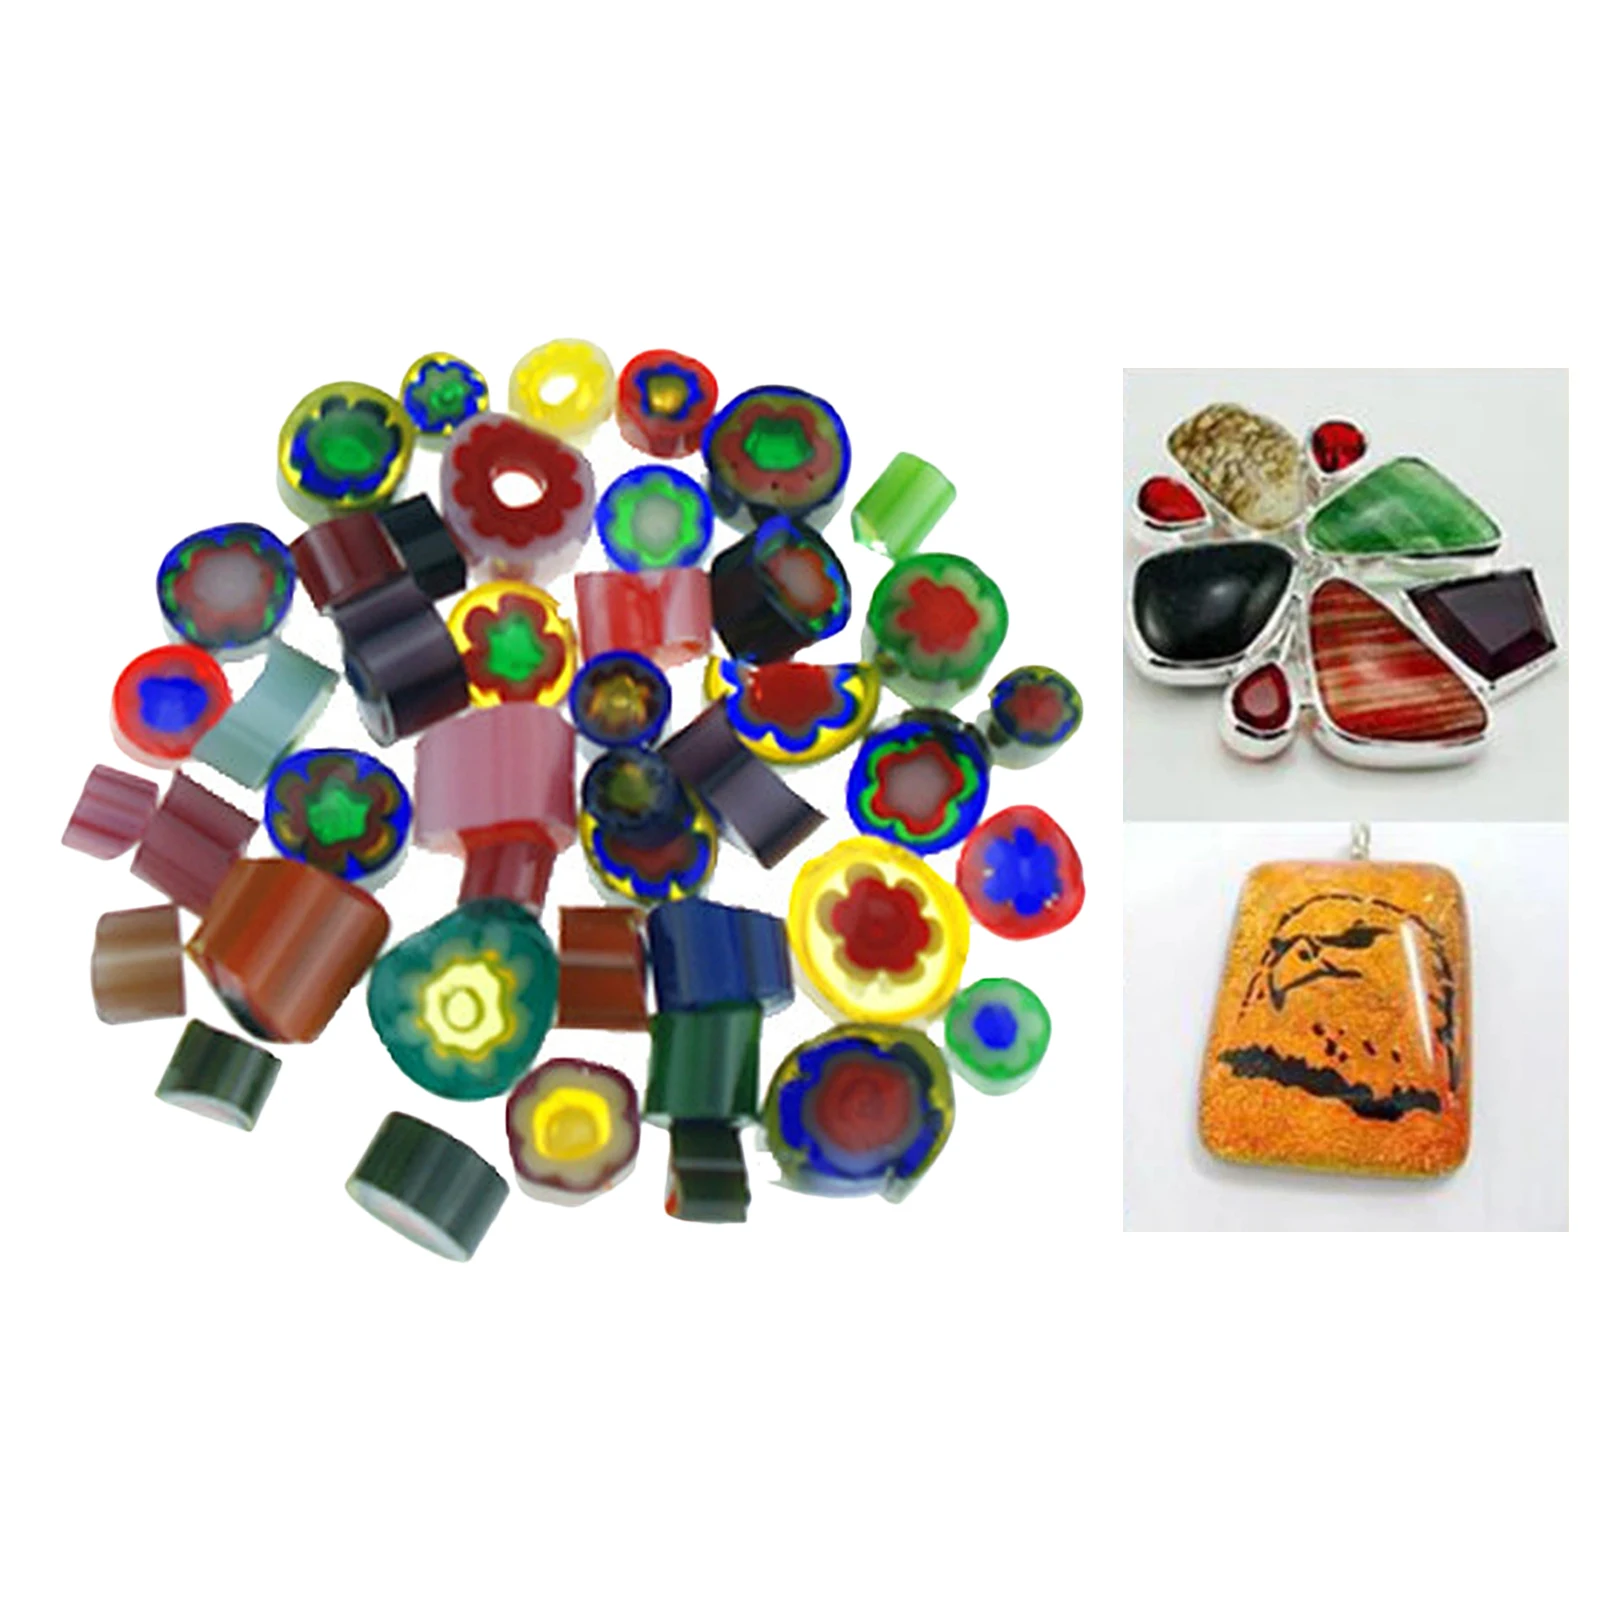 Microwave Kiln Kit Tool Set Stained Glass Fusing Supplies DIY Mixed Glass Jewelry Kiln Tools Handicraft Accessories 28g/Set